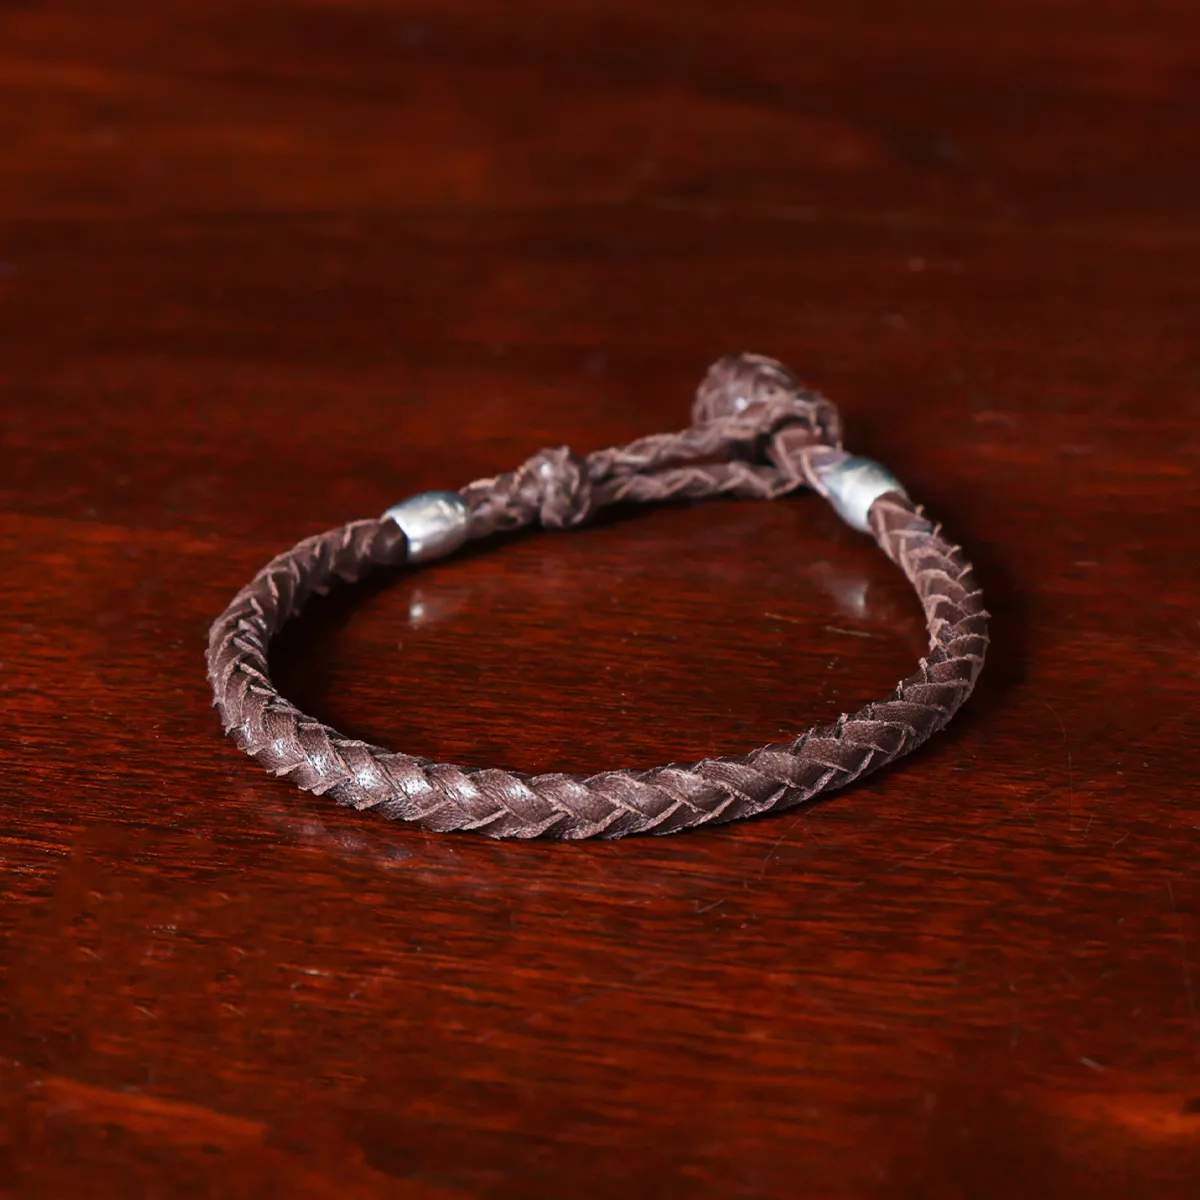 Braided Brown Leather Bracelet with Pewter Beads - Large (9 in. Long)